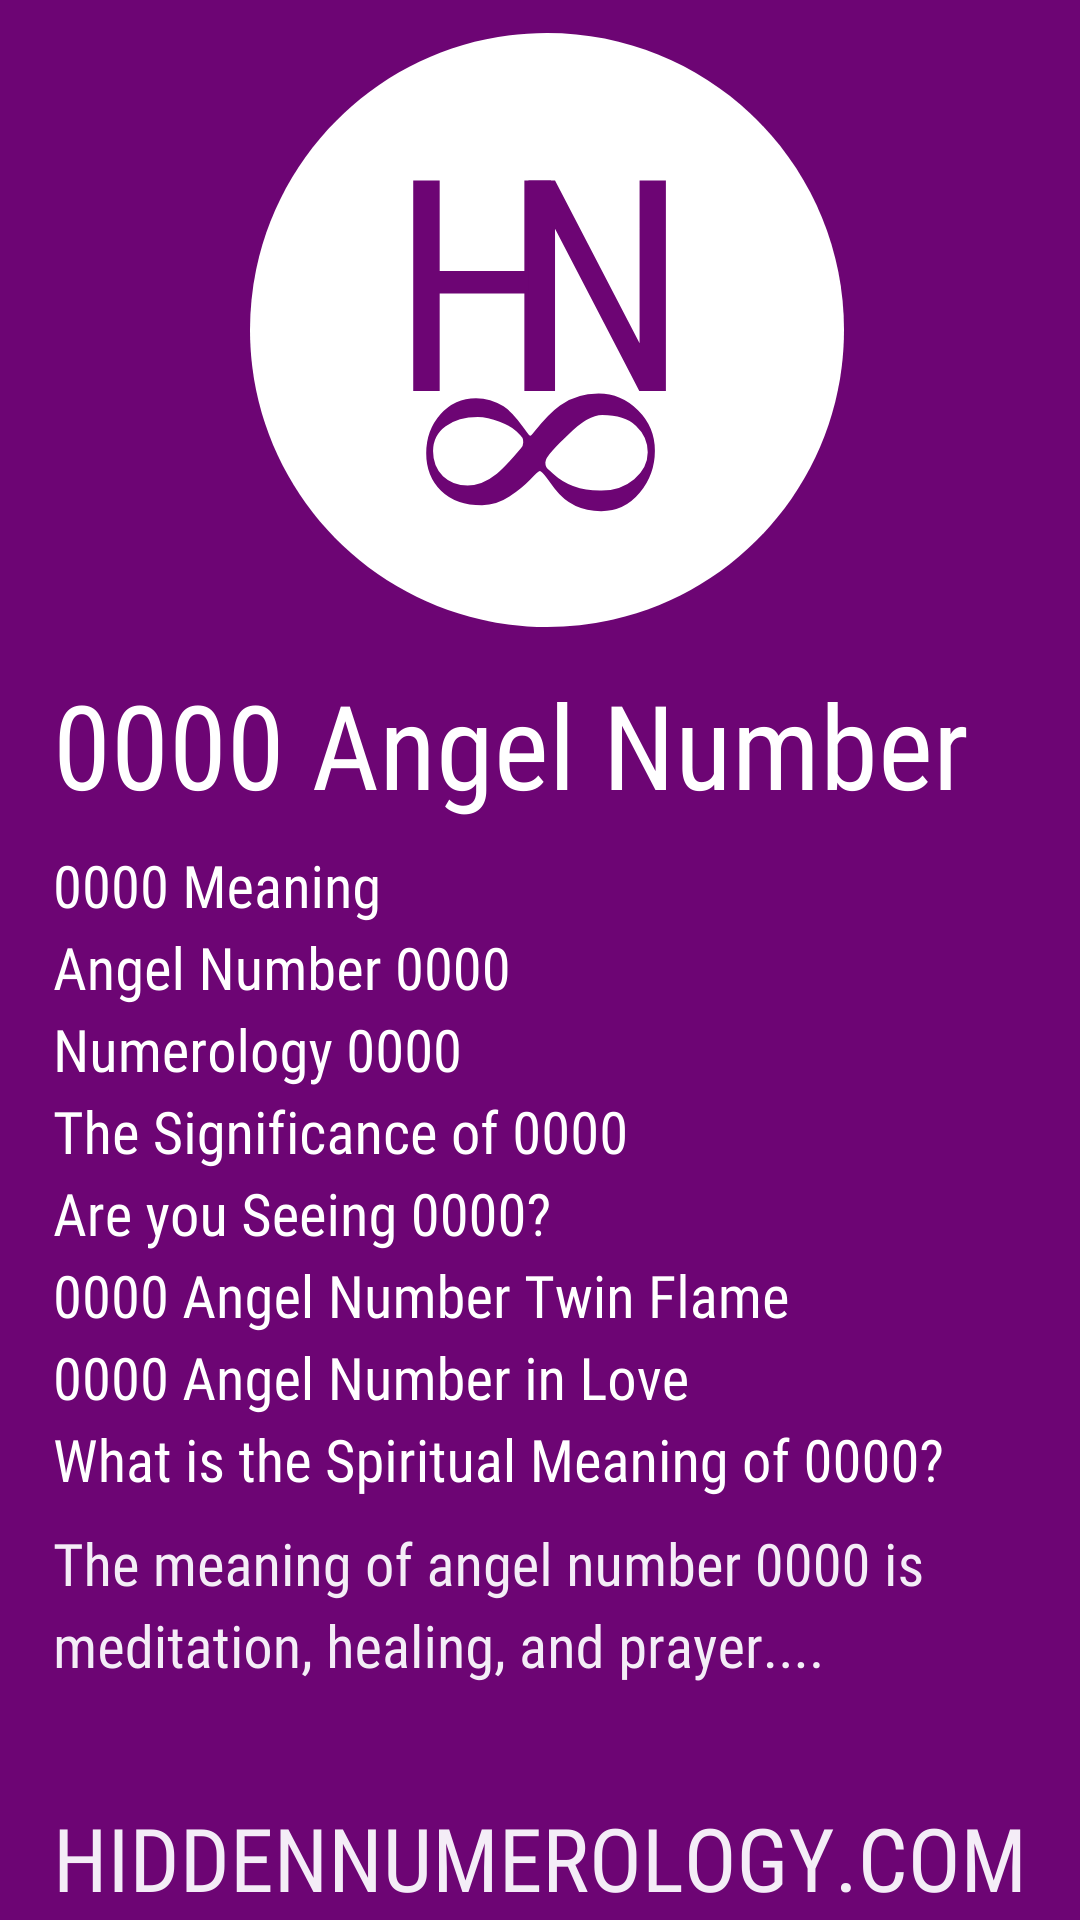 How Do You Determine Your Angel Number